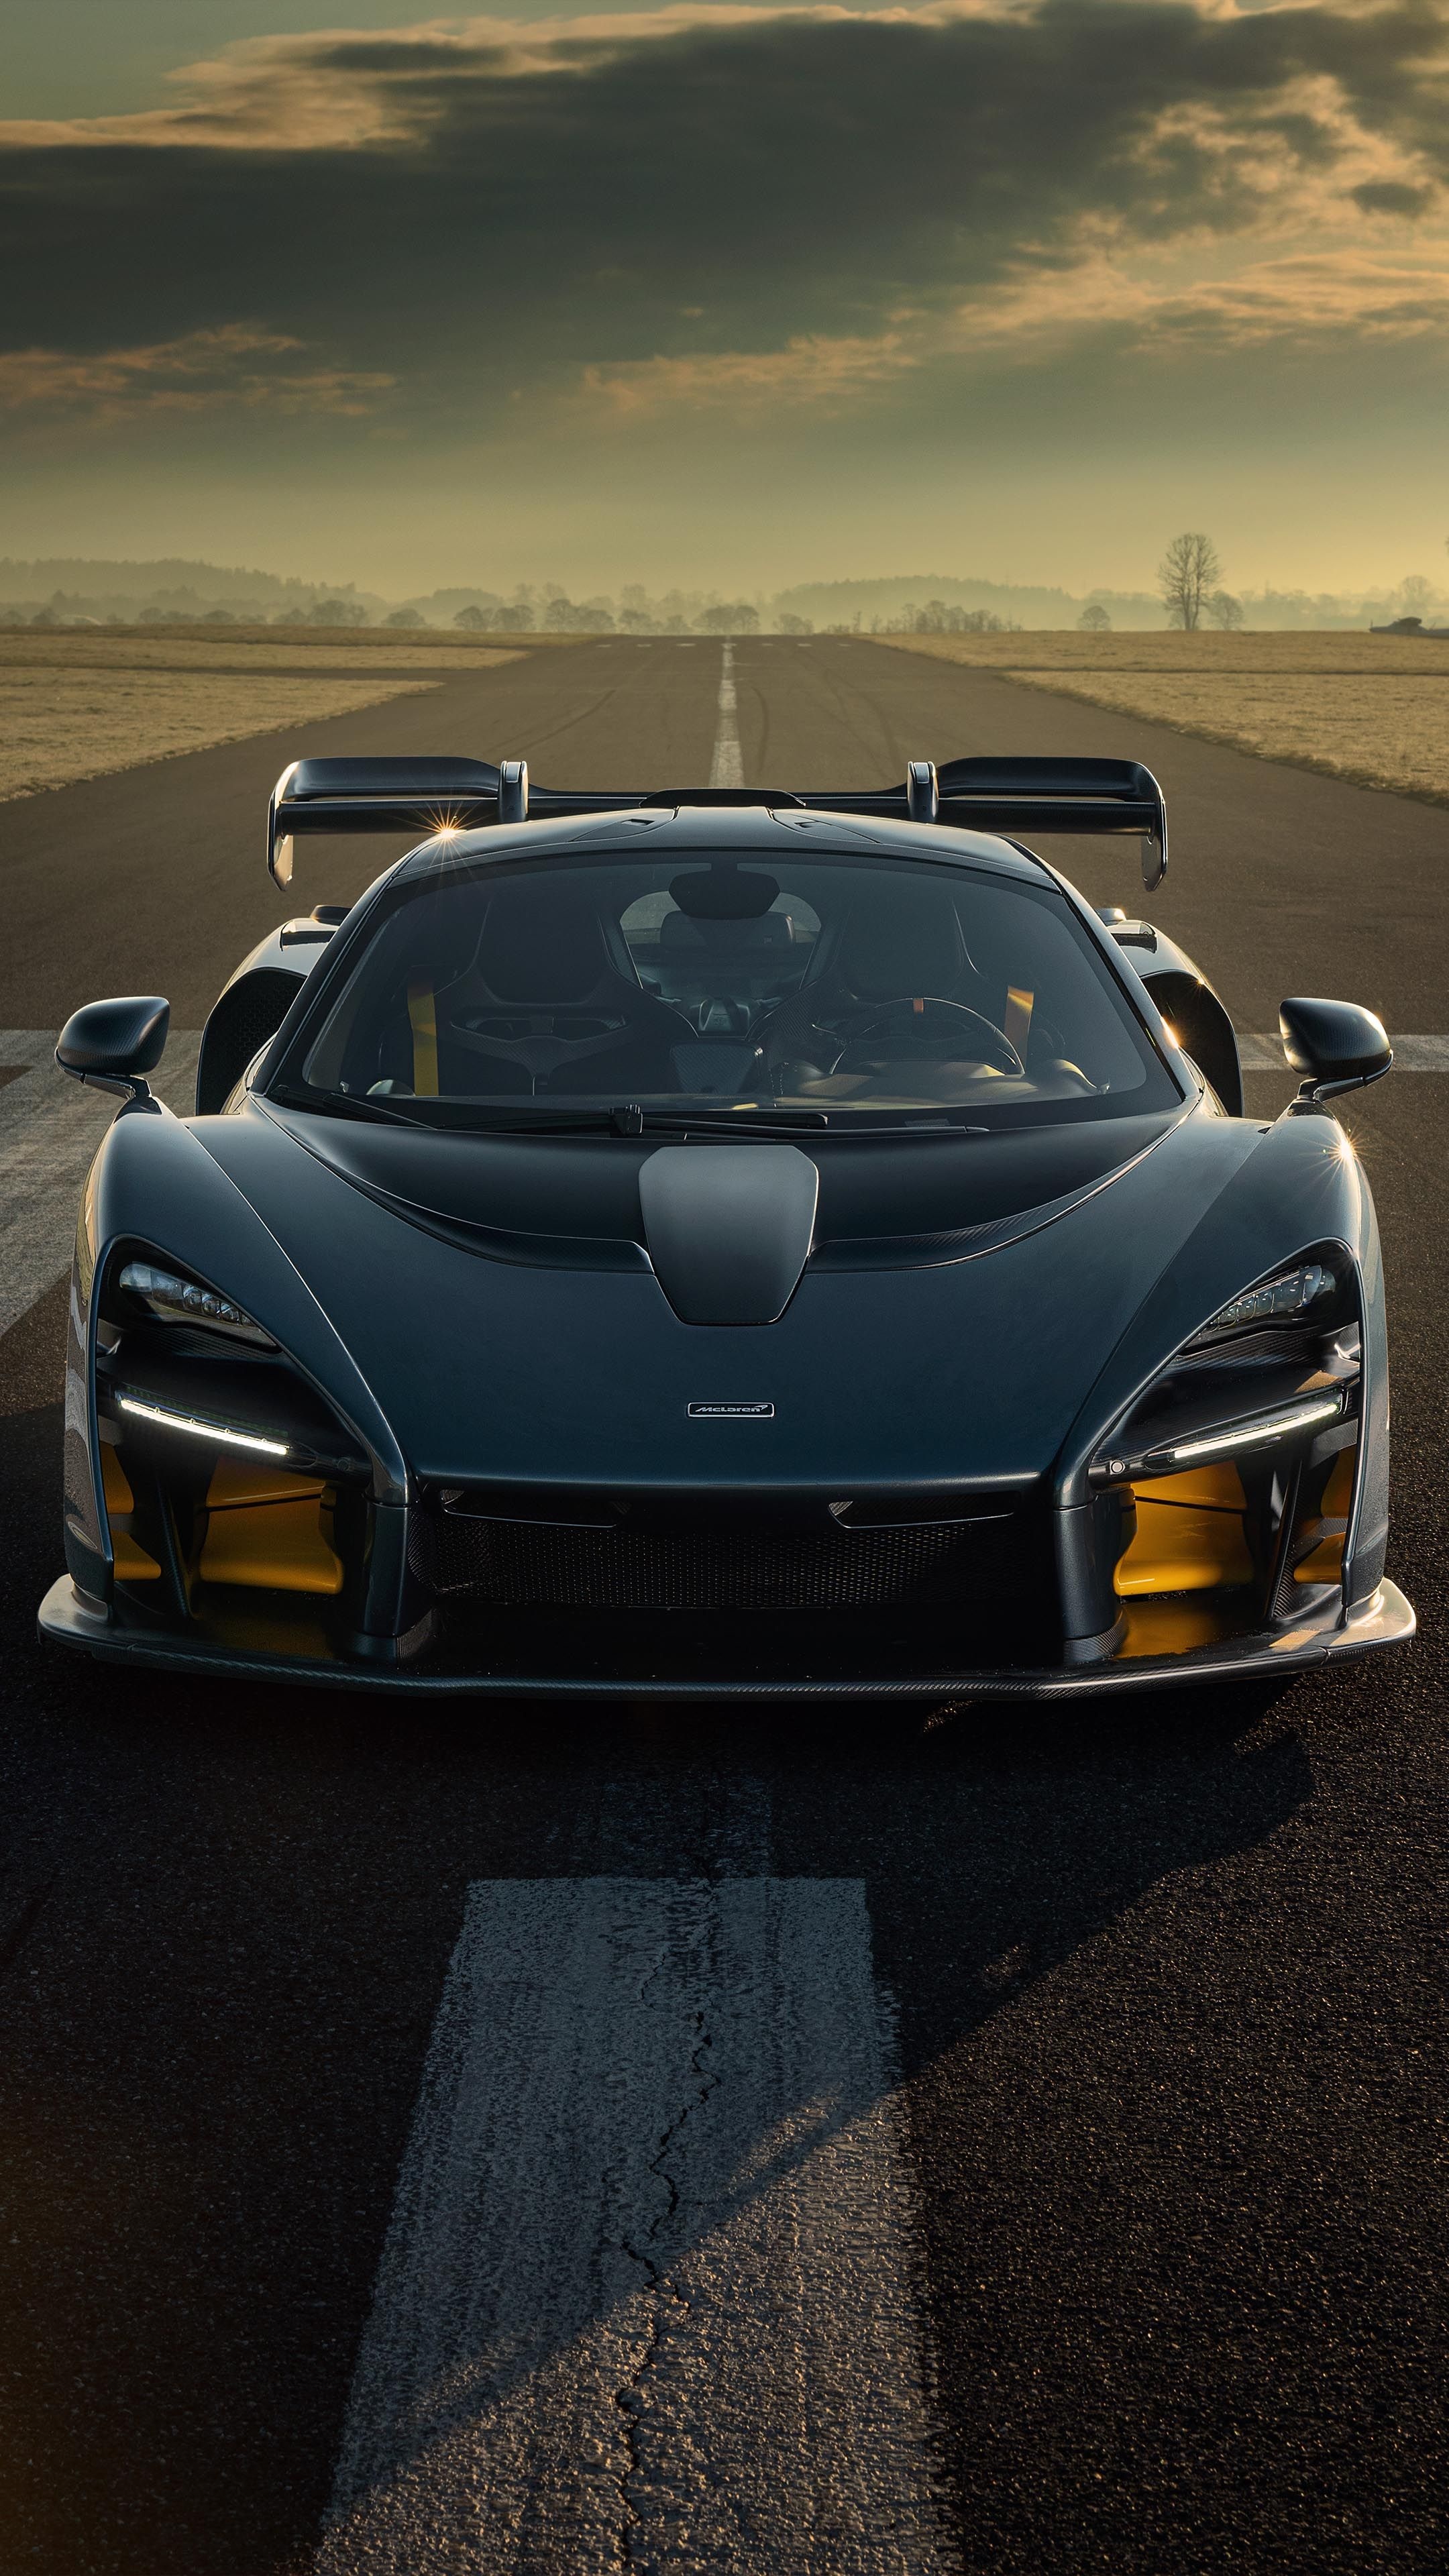 Sports Car: Comes with sophisticated braking systems, McLaren Senna. 2160x3840 4K Wallpaper.